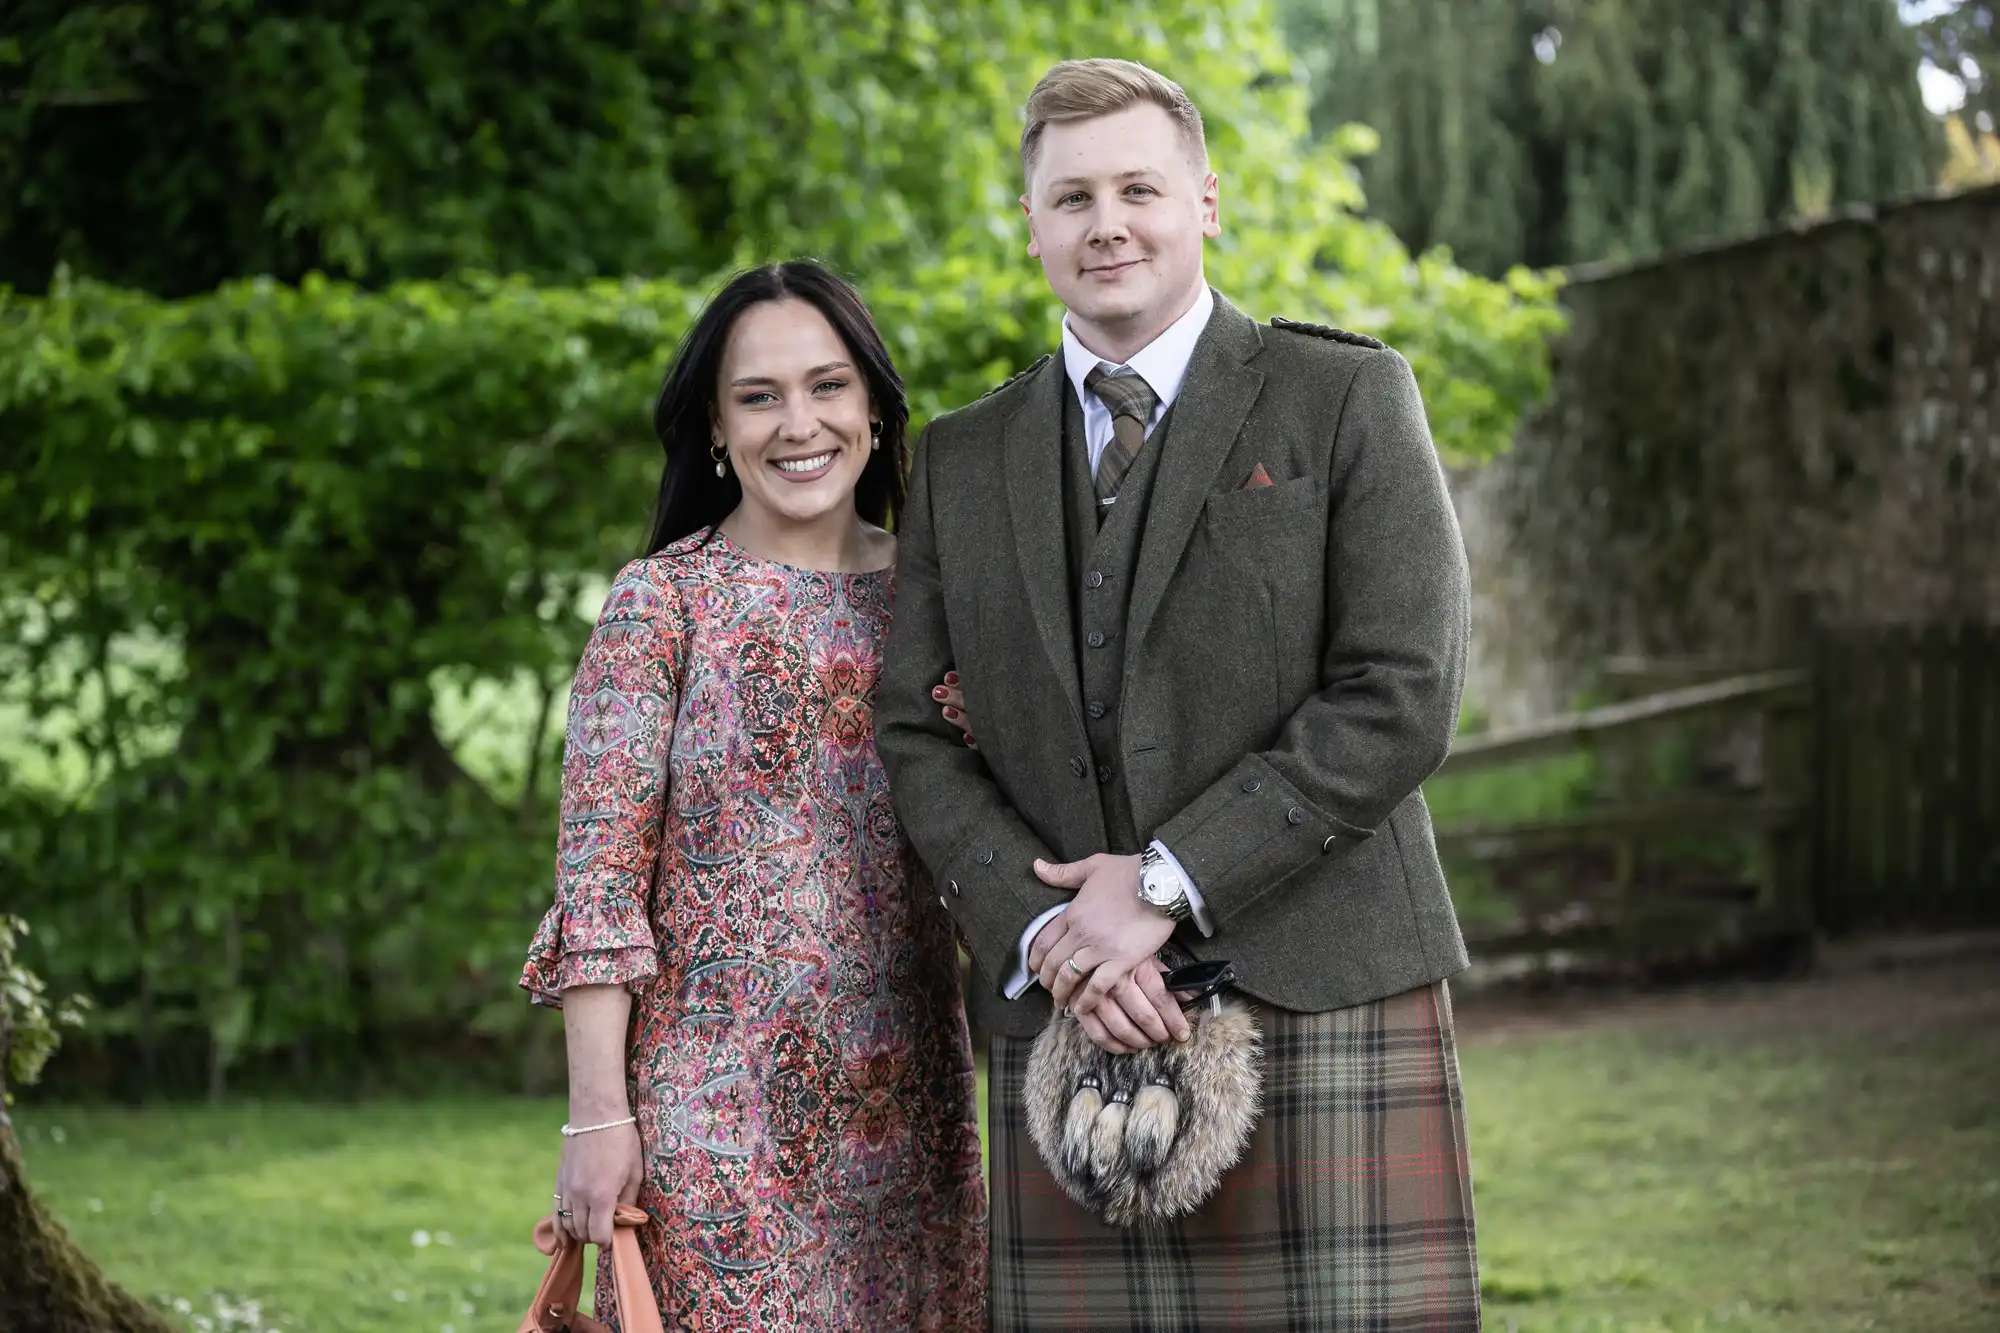 A woman in a floral dress and a man in a tartan kilt and tweed jacket stand side by side, smiling in a lush garden.